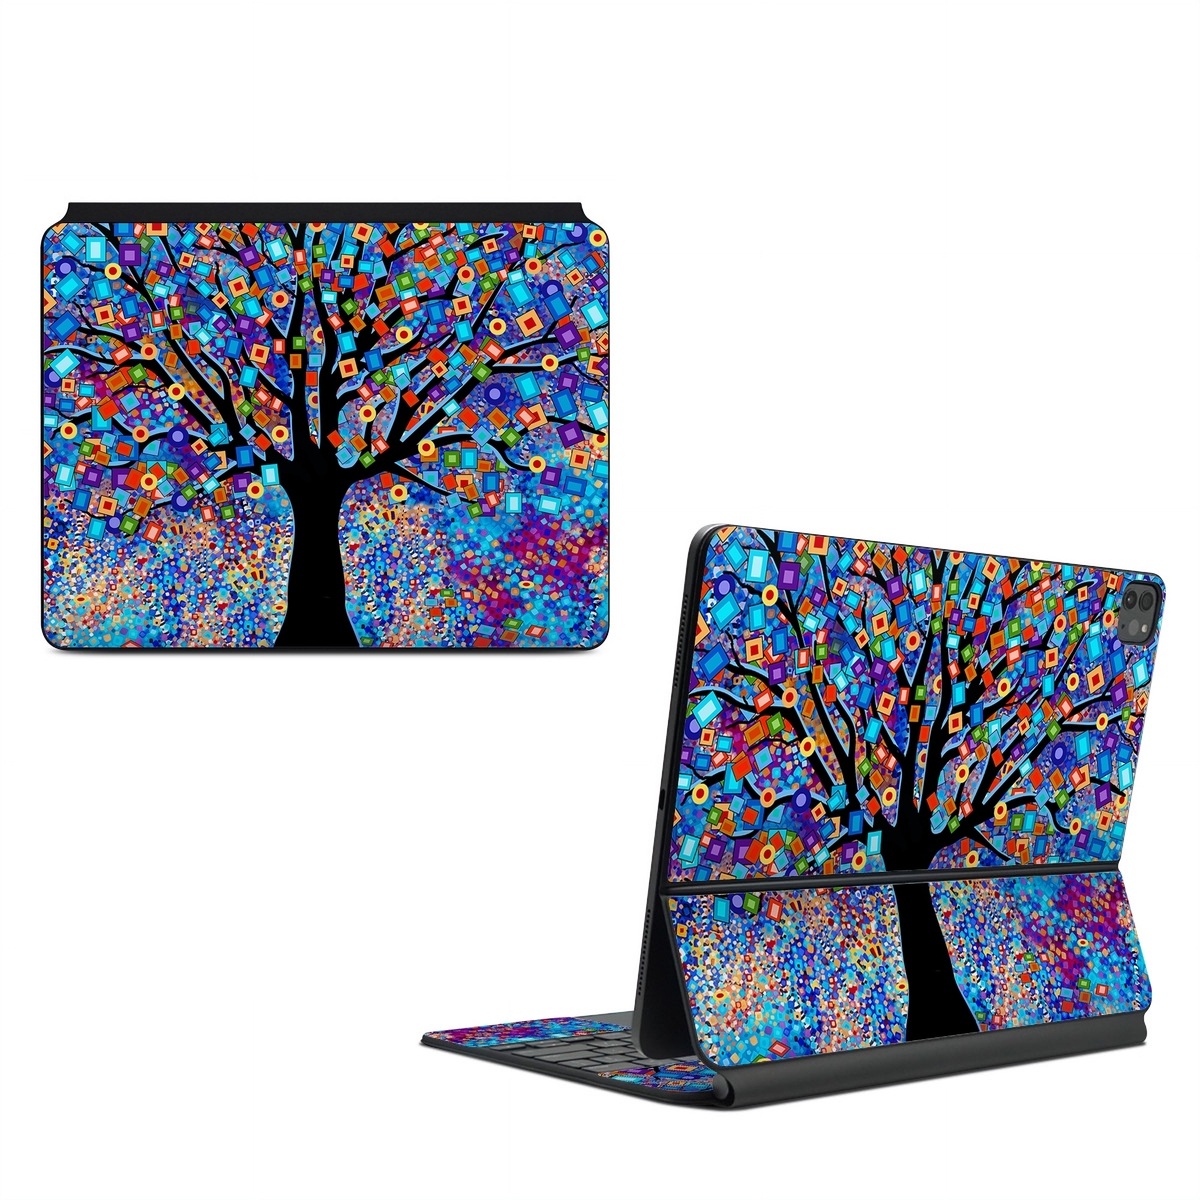 Magic Keyboard for iPad Series Skin design of Psychedelic art, Modern art, Art, with black, blue, red, orange, yellow, green, purple colors